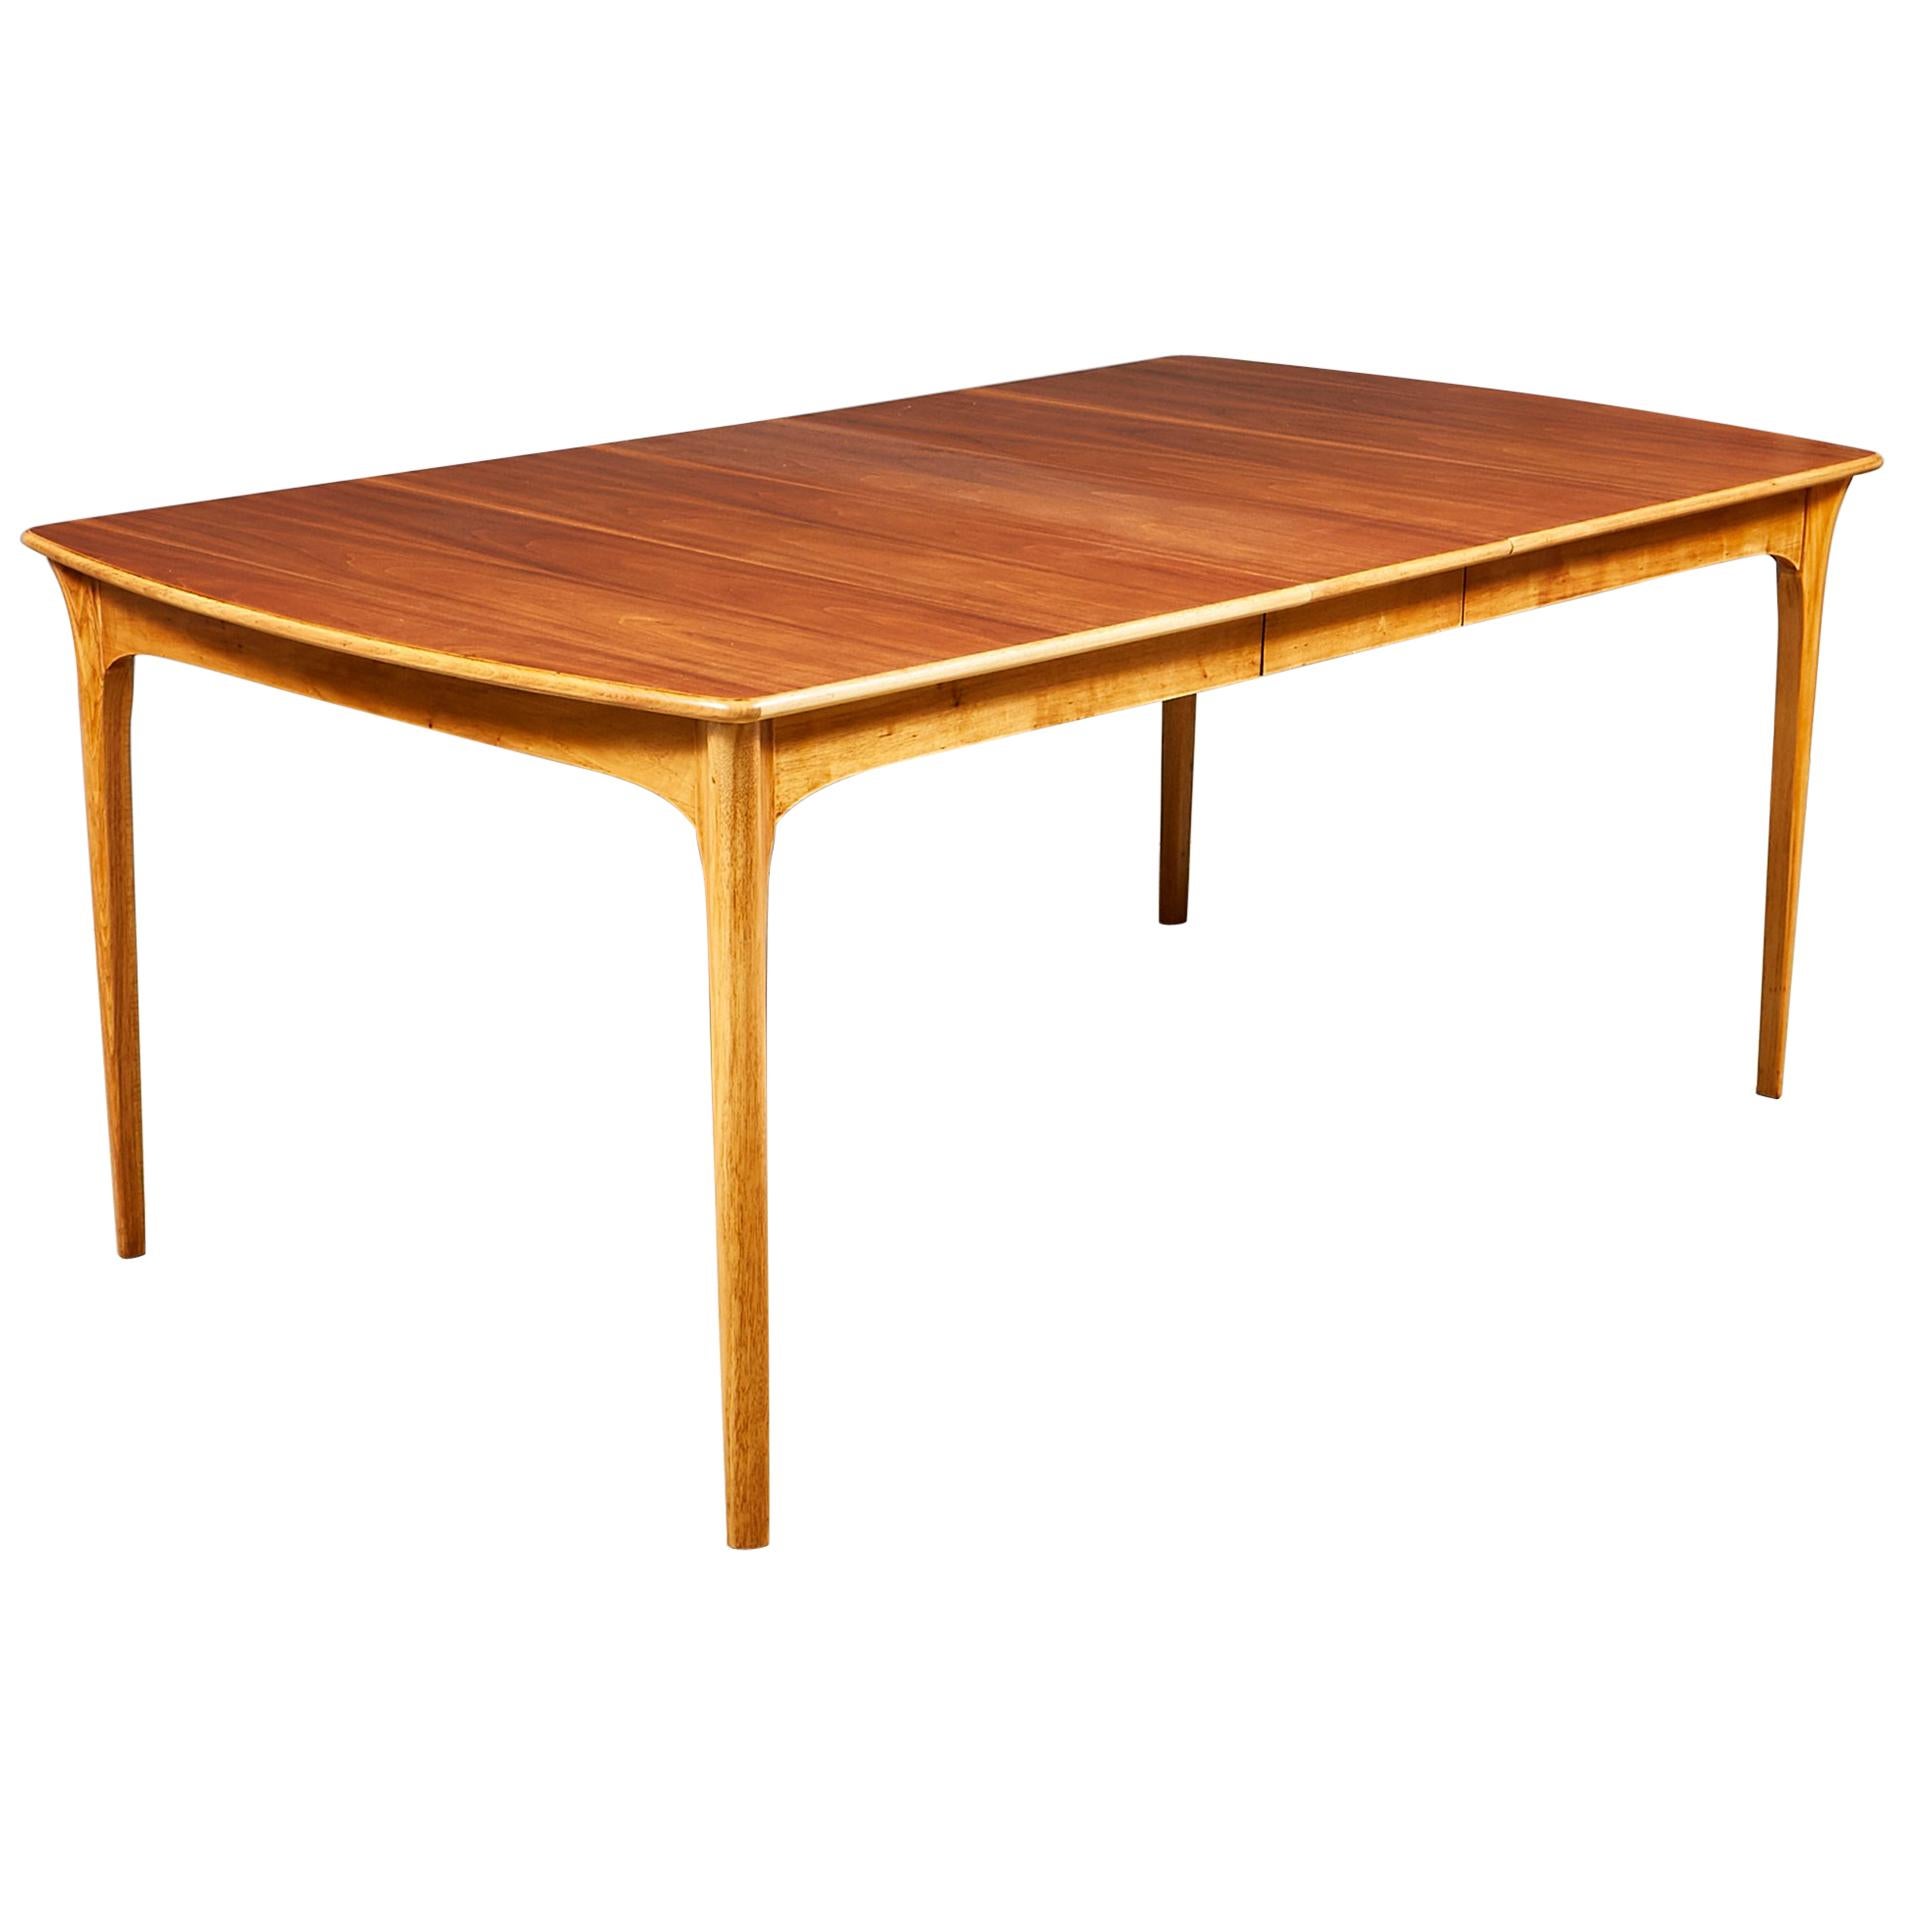 1960s Walnut Wood Dining Room Table For Sale